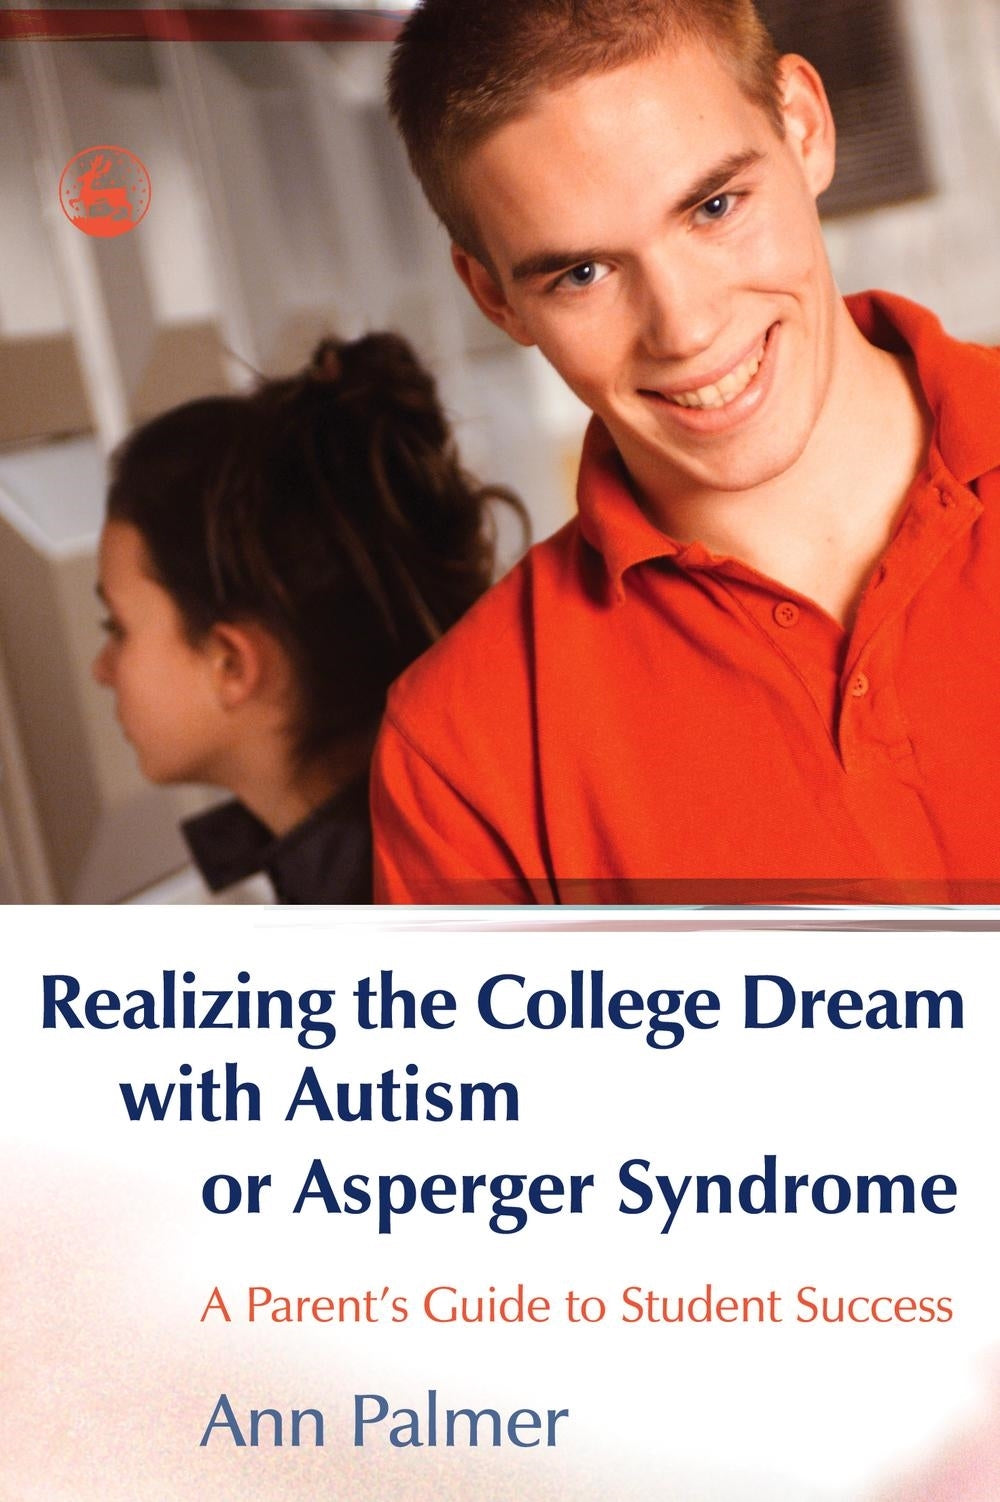 Realizing the College Dream with Autism or Asperger Syndrome by Ann Palmer